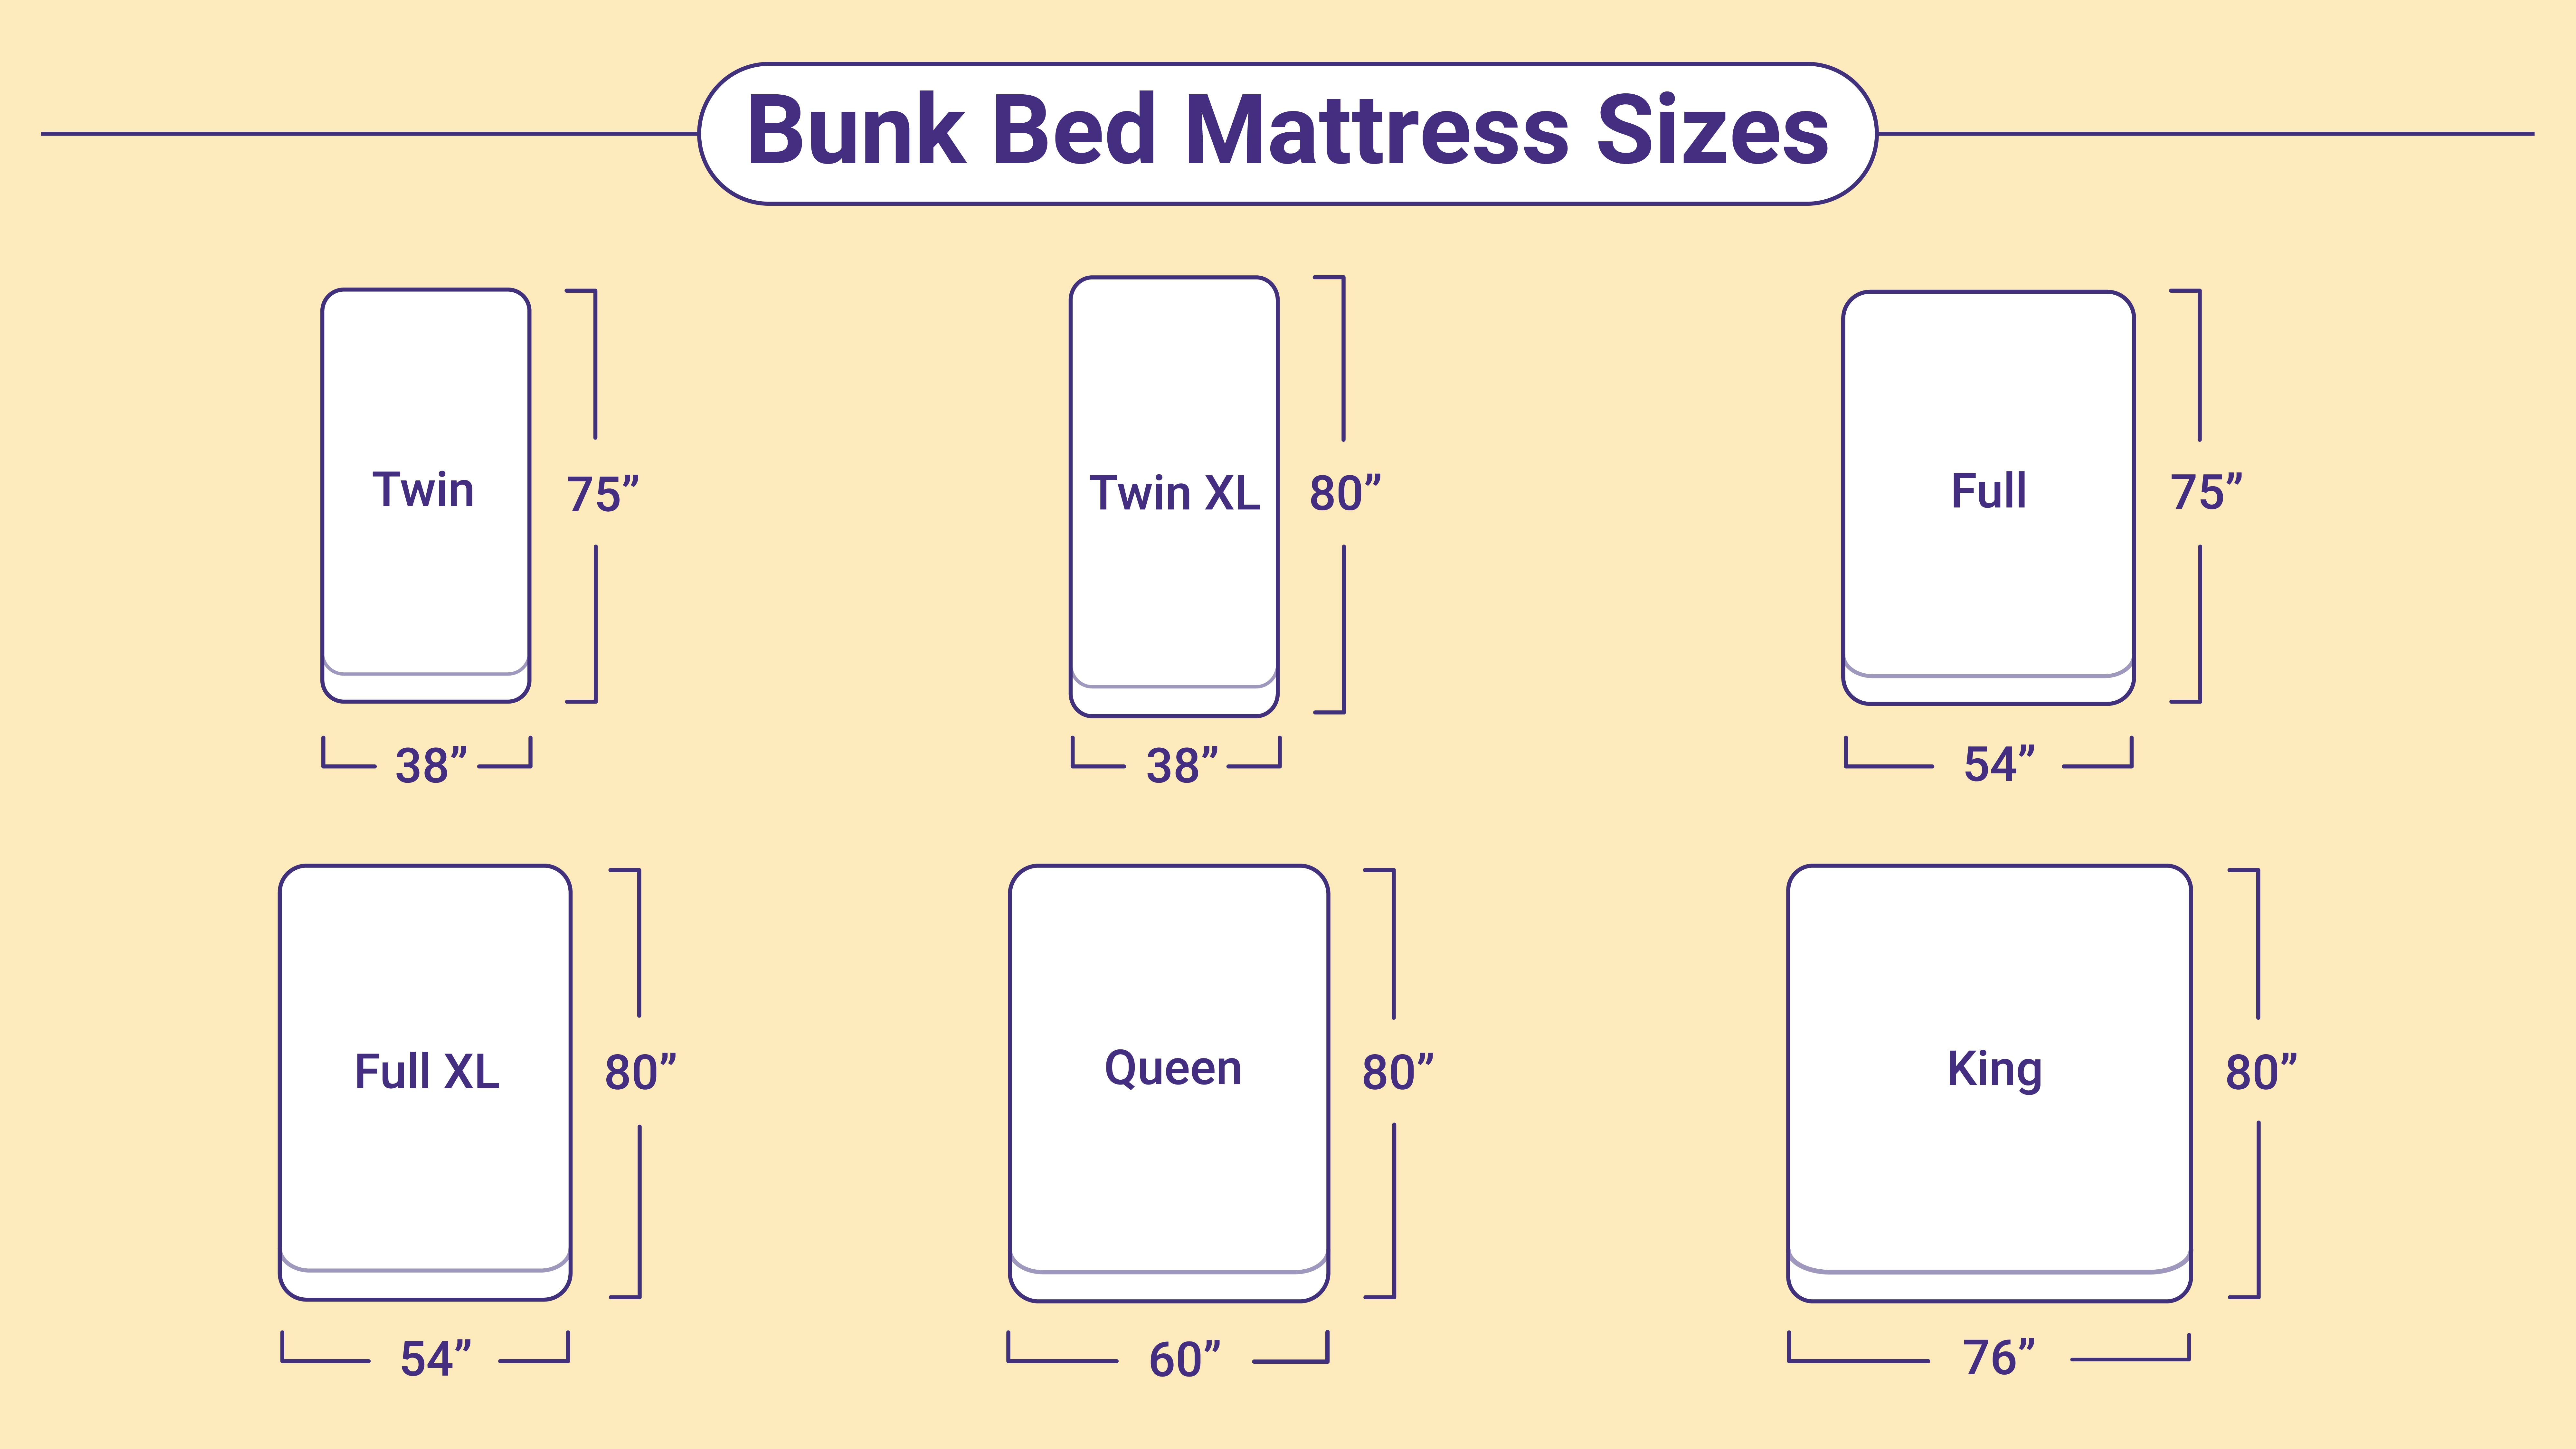 Bunk Bed Mattress Sizes And Dimensions, What Is The Width Of A Twin Bed Mattress